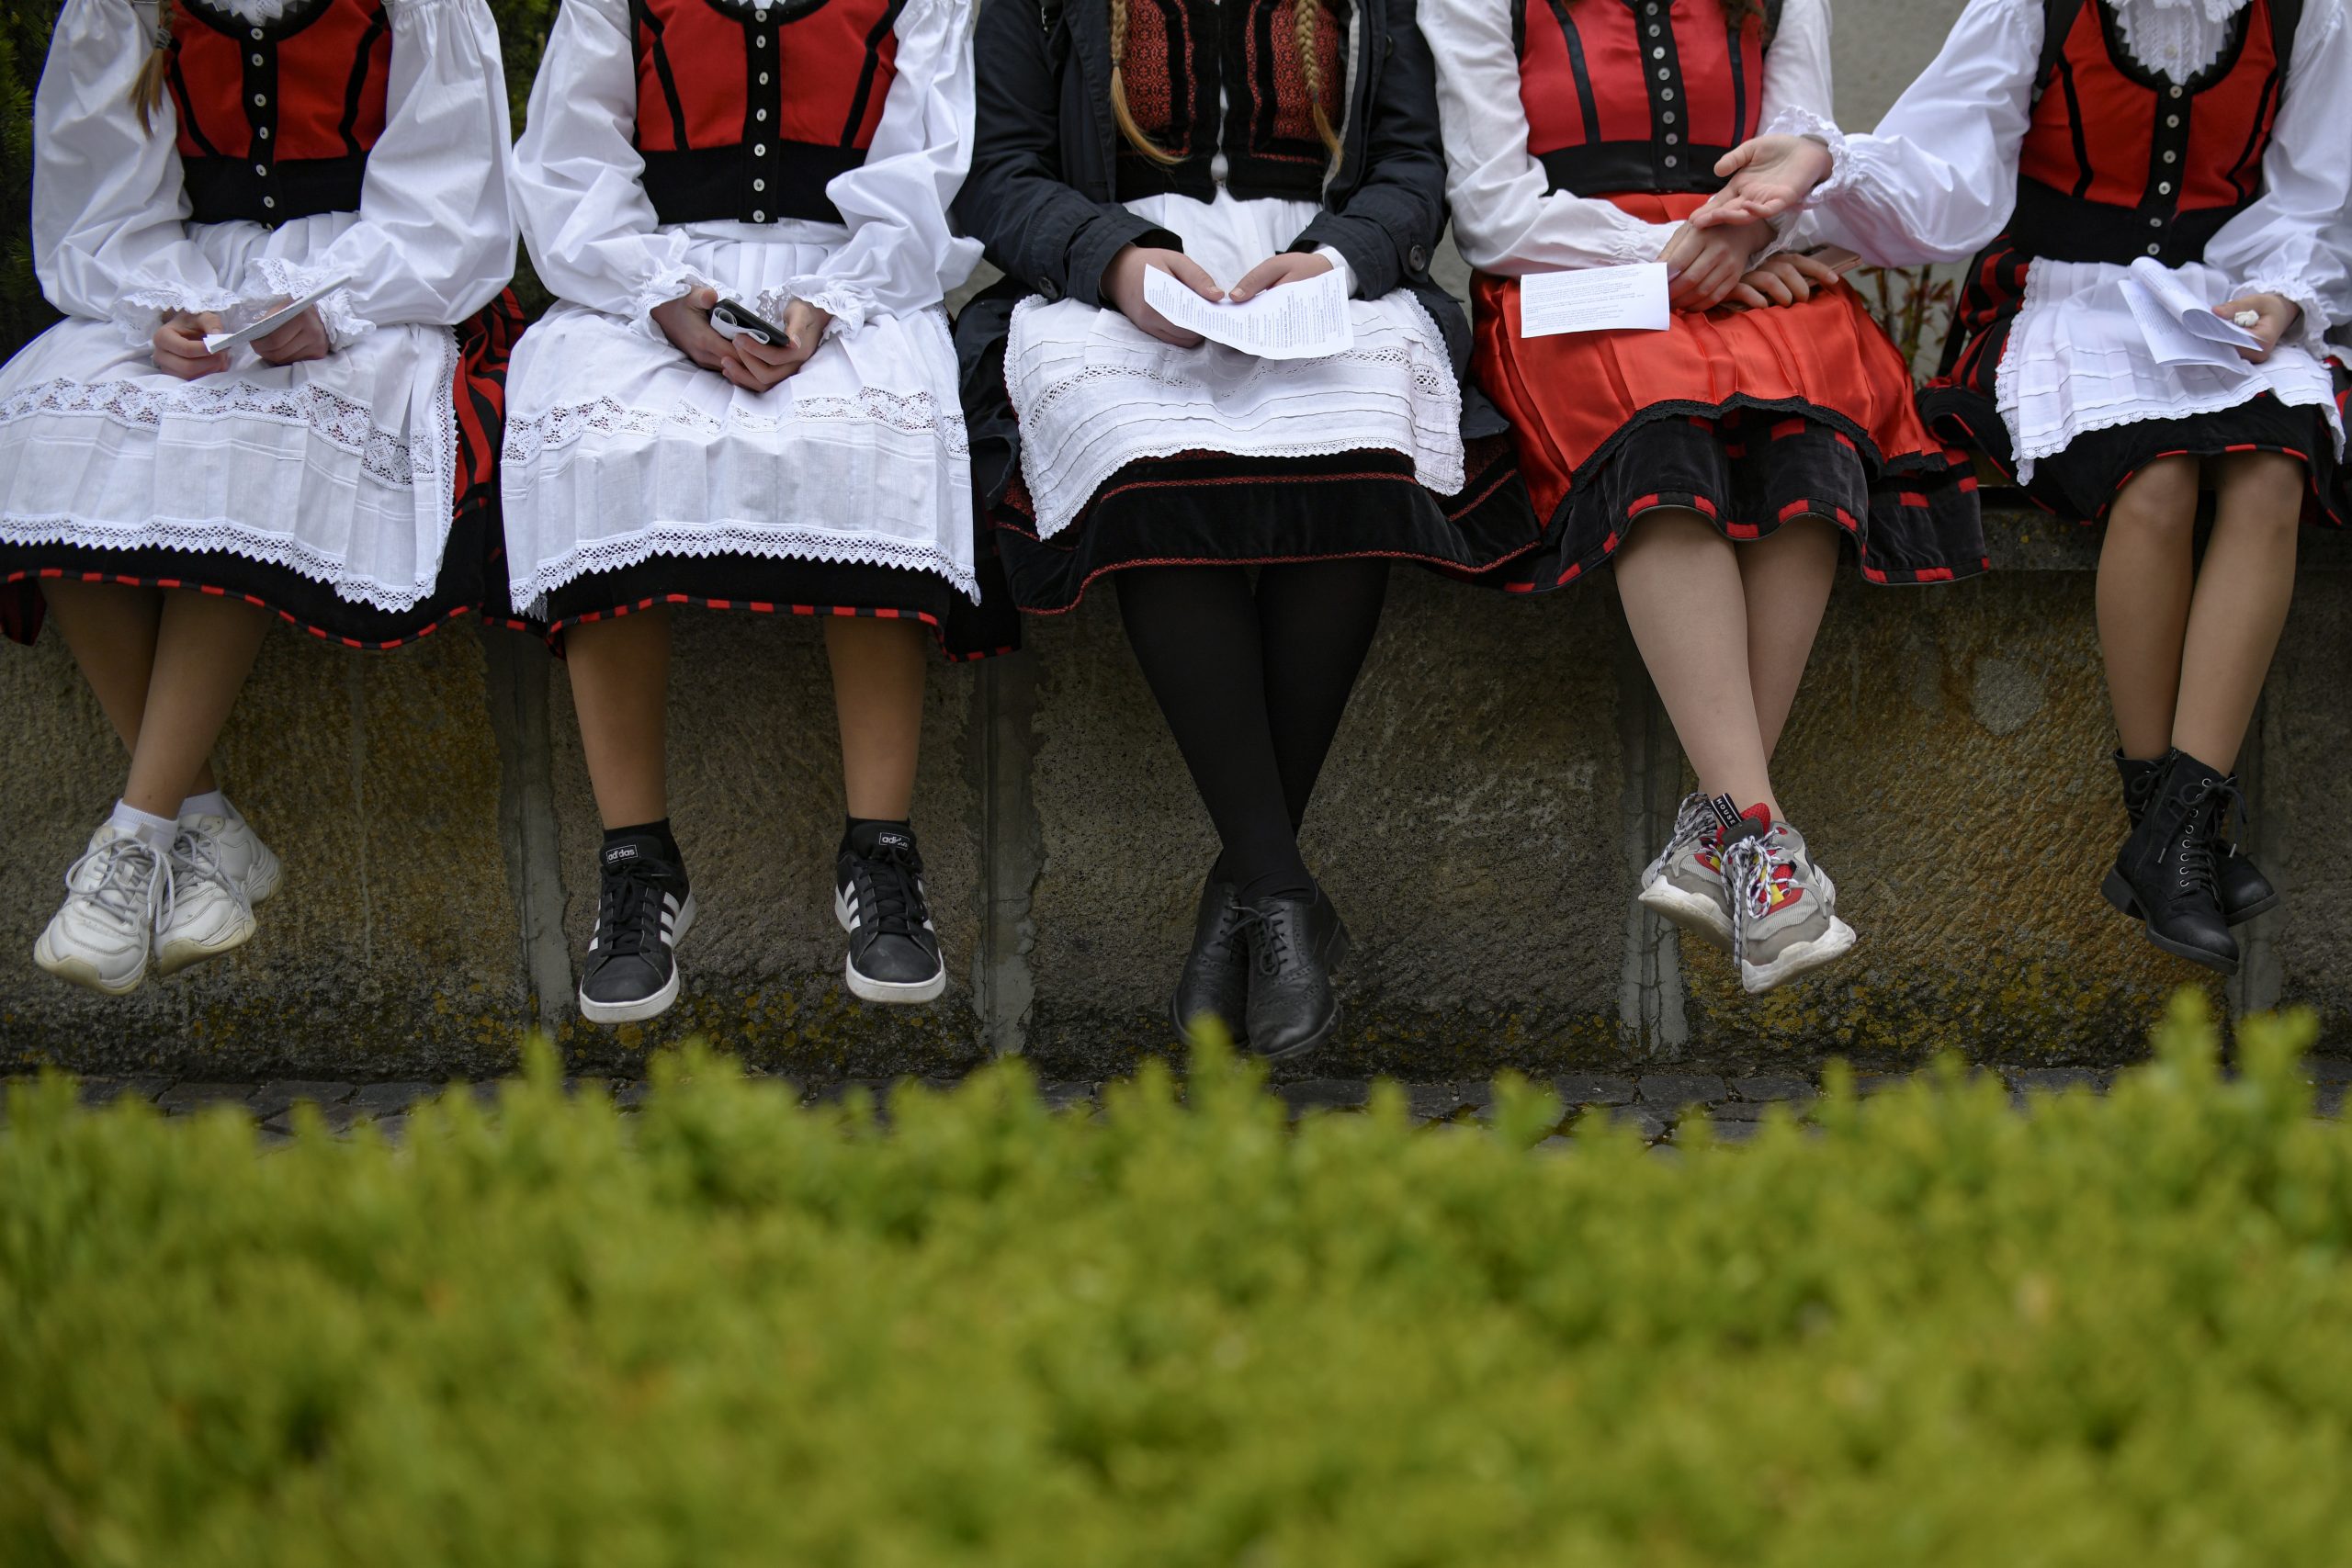 Girls wearing traditional outfits rest during a Catholic pilgrimage attended by tens of thousands who joined their faith's biggest religious event, in Sumuleu Ciuc, Romania, Saturday, May 22, 2021. More than 35,000 Catholic pilgrims congregated at an open-air shrine in Sumuleu Ciuc in Transylvania on Saturday for an age-old procession that last year was canceled due to the coronavirus pandemic. (AP Photo/Andreea Alexandru)